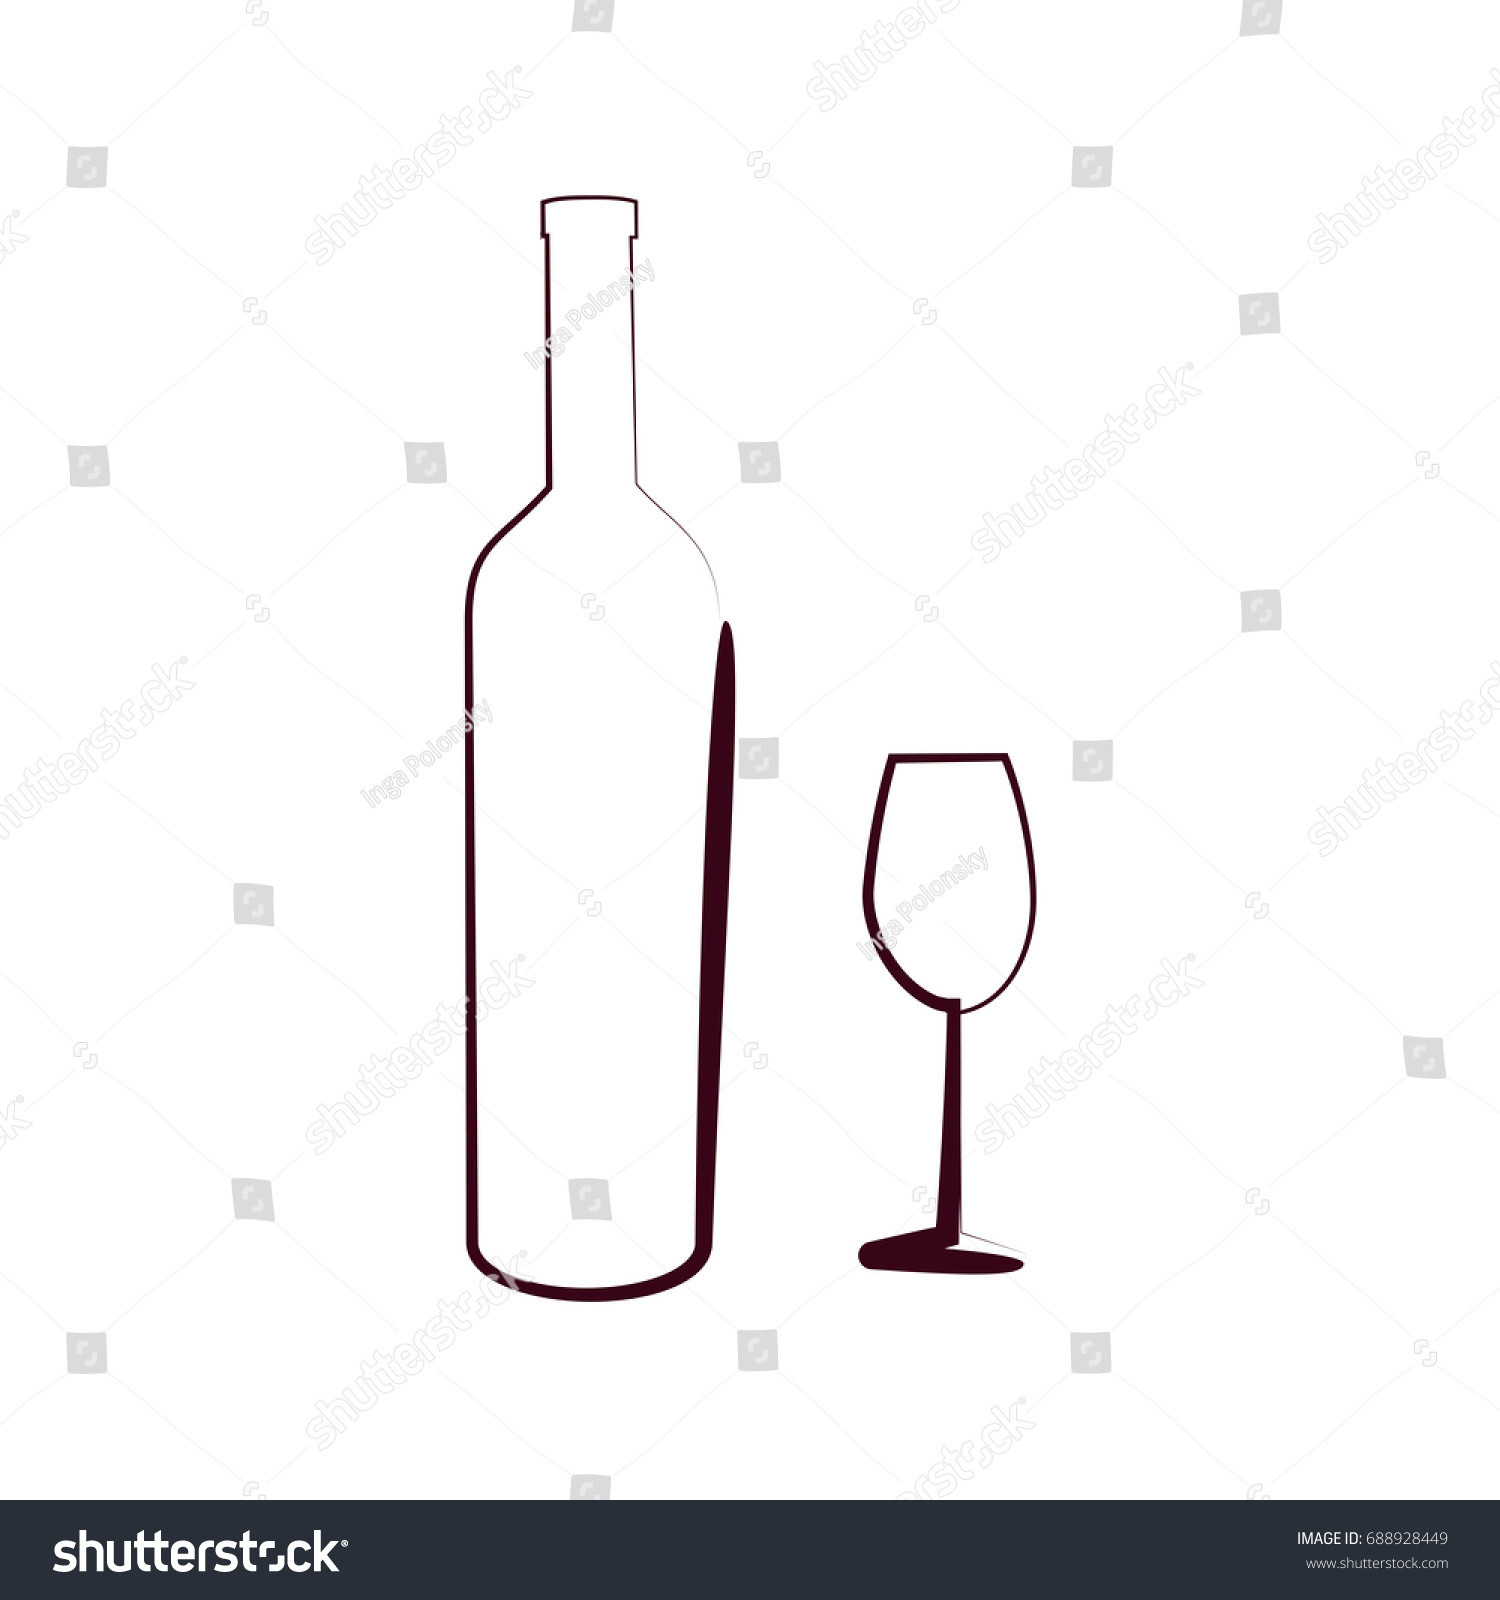 27 Stylish Polonia Lead Crystal Vase 2024 free download polonia lead crystal vase of sketched bottle wine glass isolated on stock vector royalty free inside sketched bottle of wine and glass isolated on white background design template for label